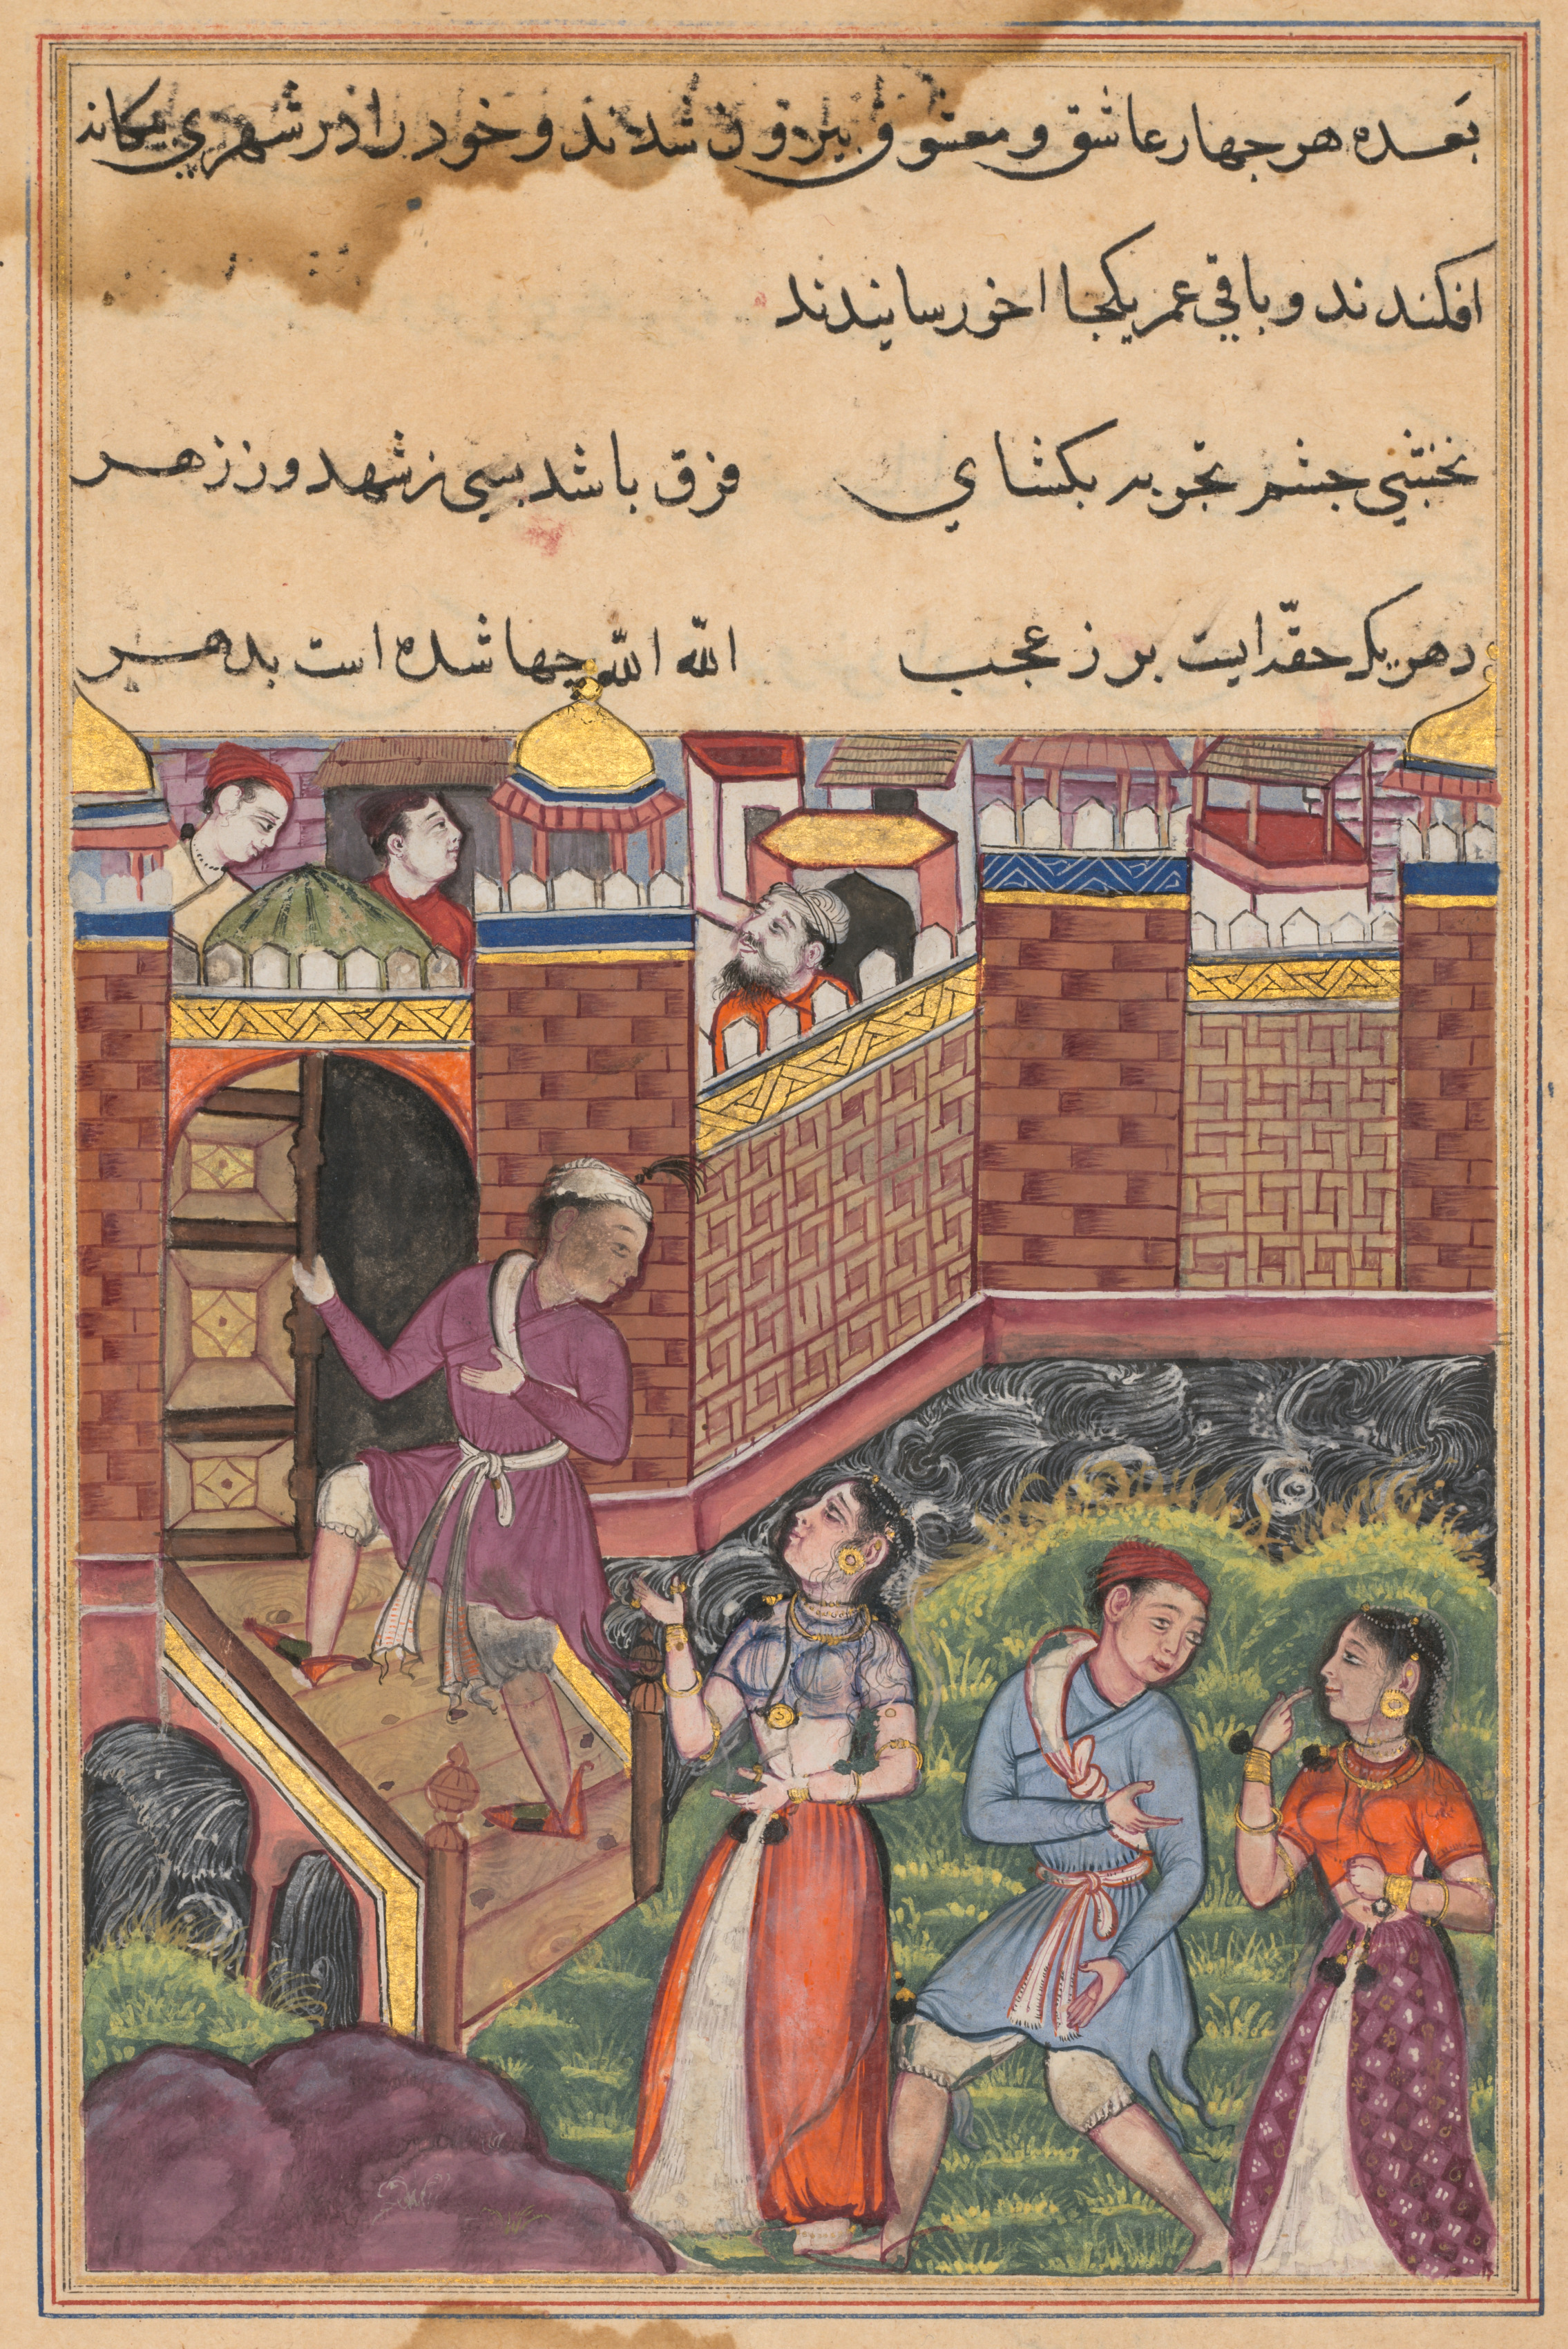 The two couples reach a foreign city where they make their home, from a Tuti-nama (Tales of a Parrot): Thirty-third Night